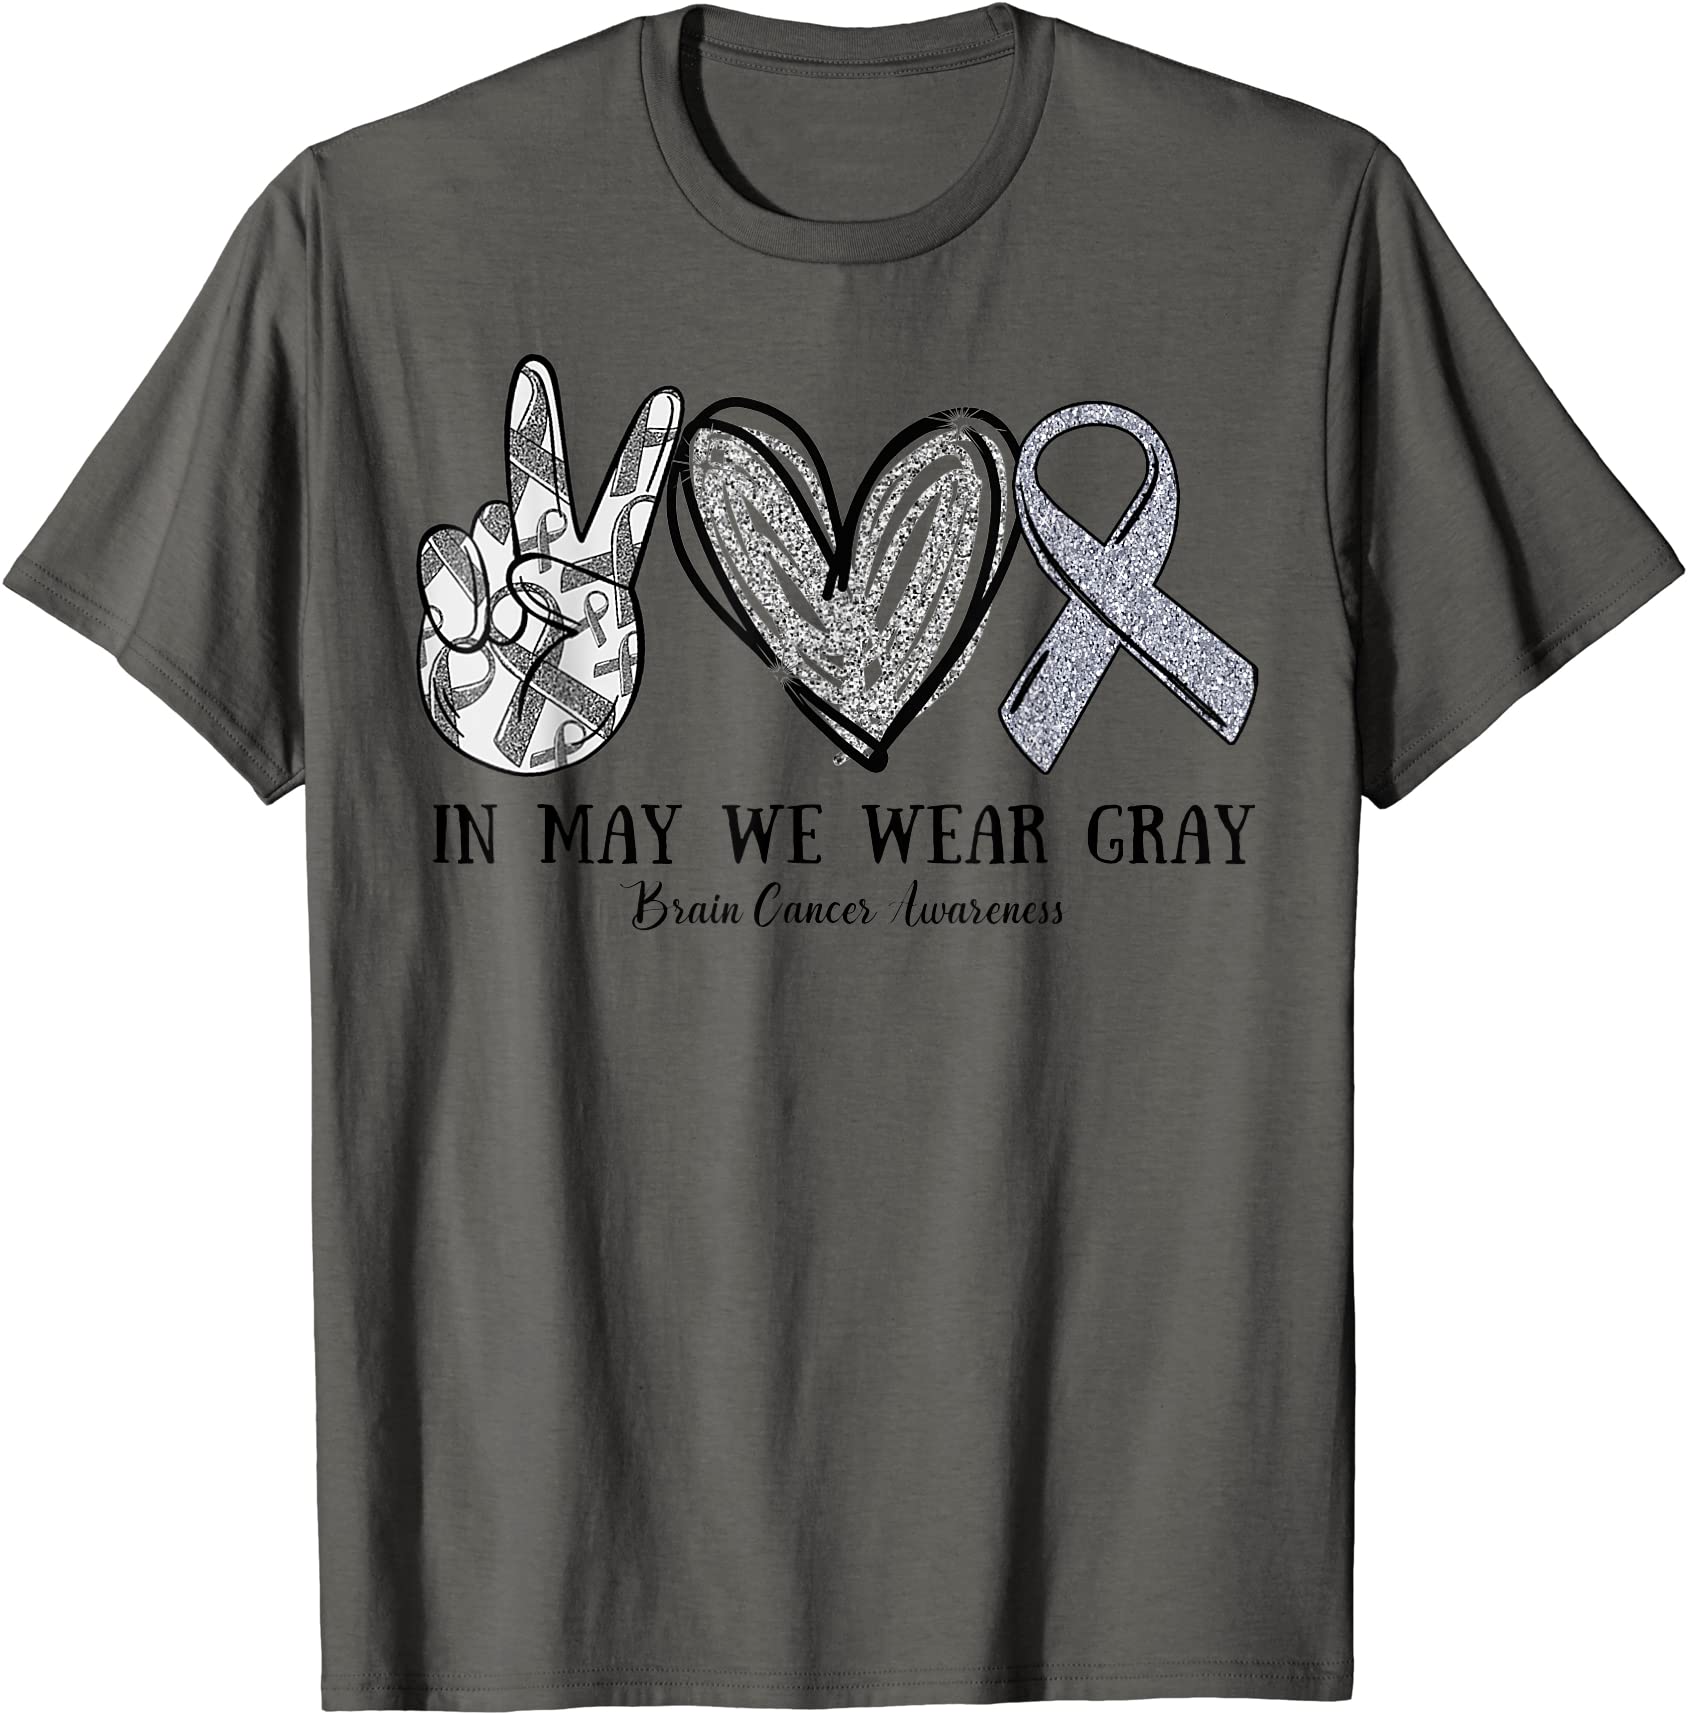 in may we wear gray brain cancer awareness month t shirt men - Buy t ...